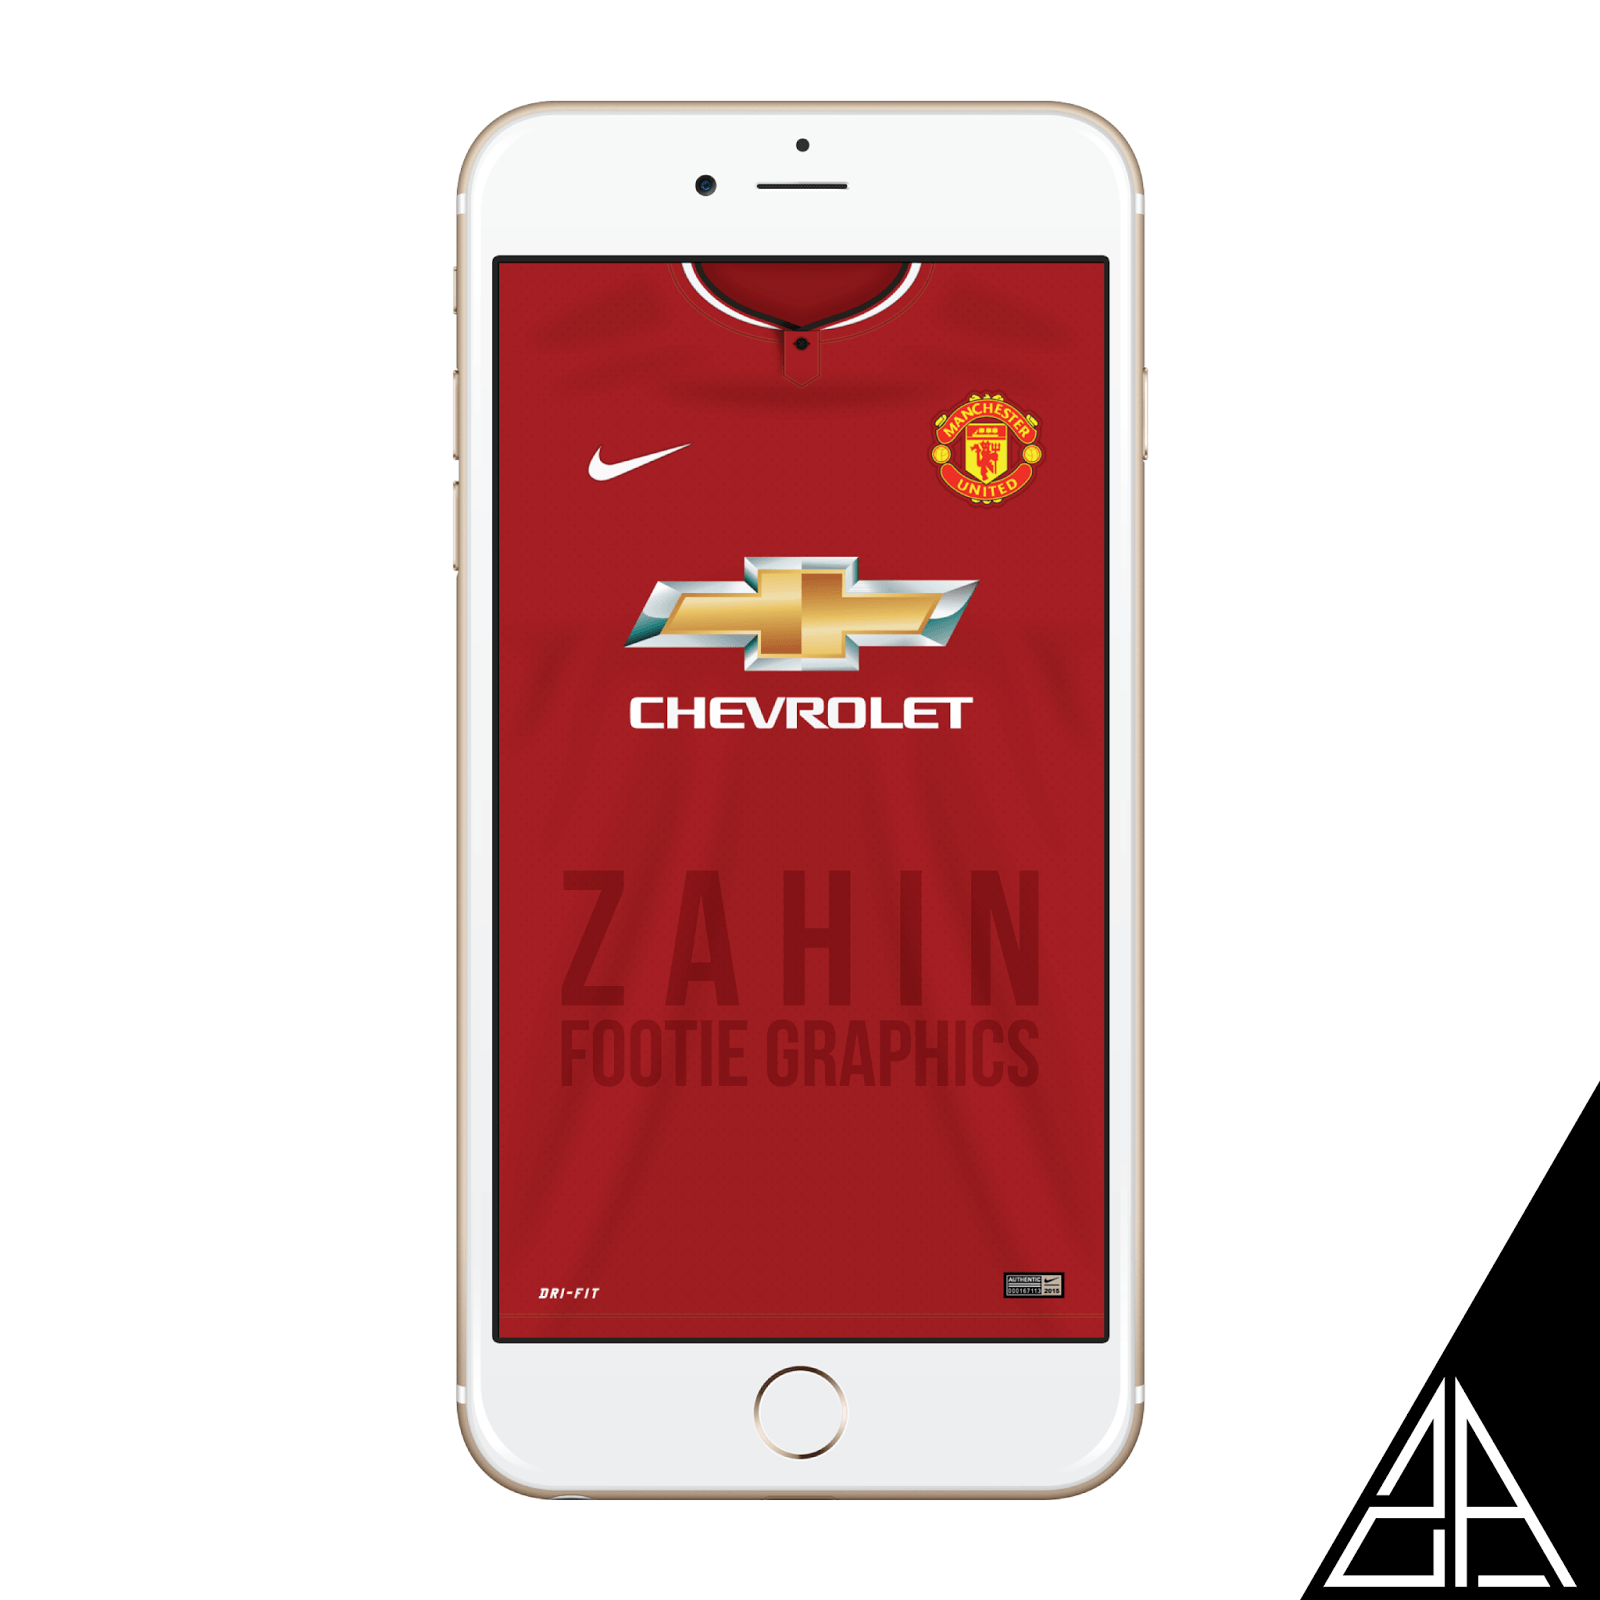 MANCHESTER UNITED 2014 15 Footie Graphics